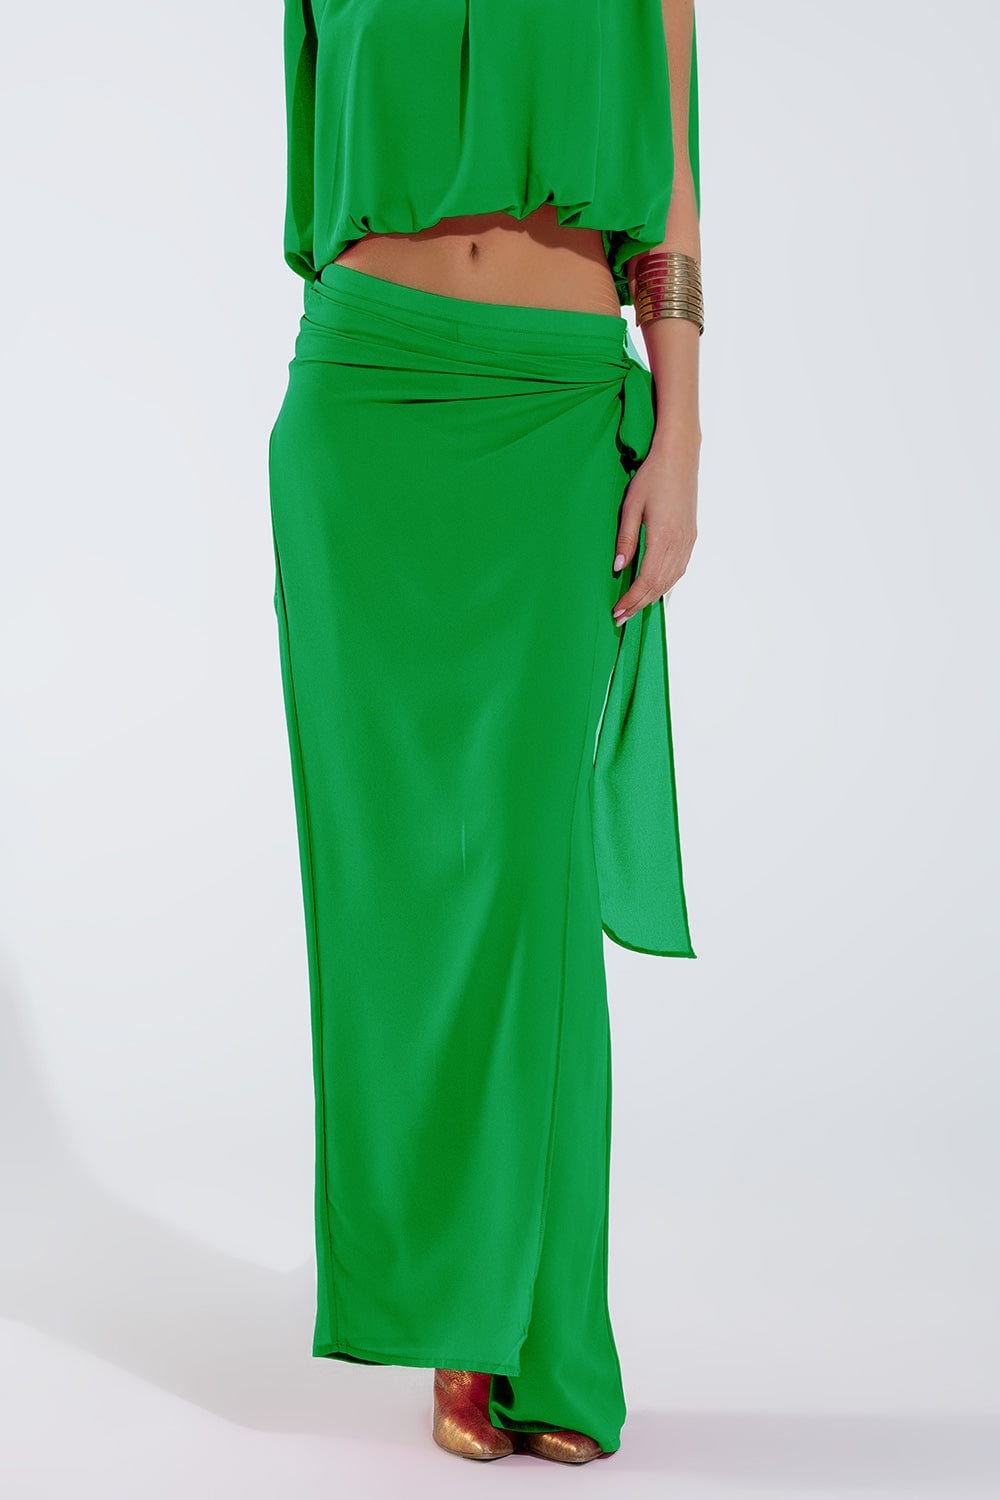 Wide Green Pants Overlay Skirt Tied At The Side